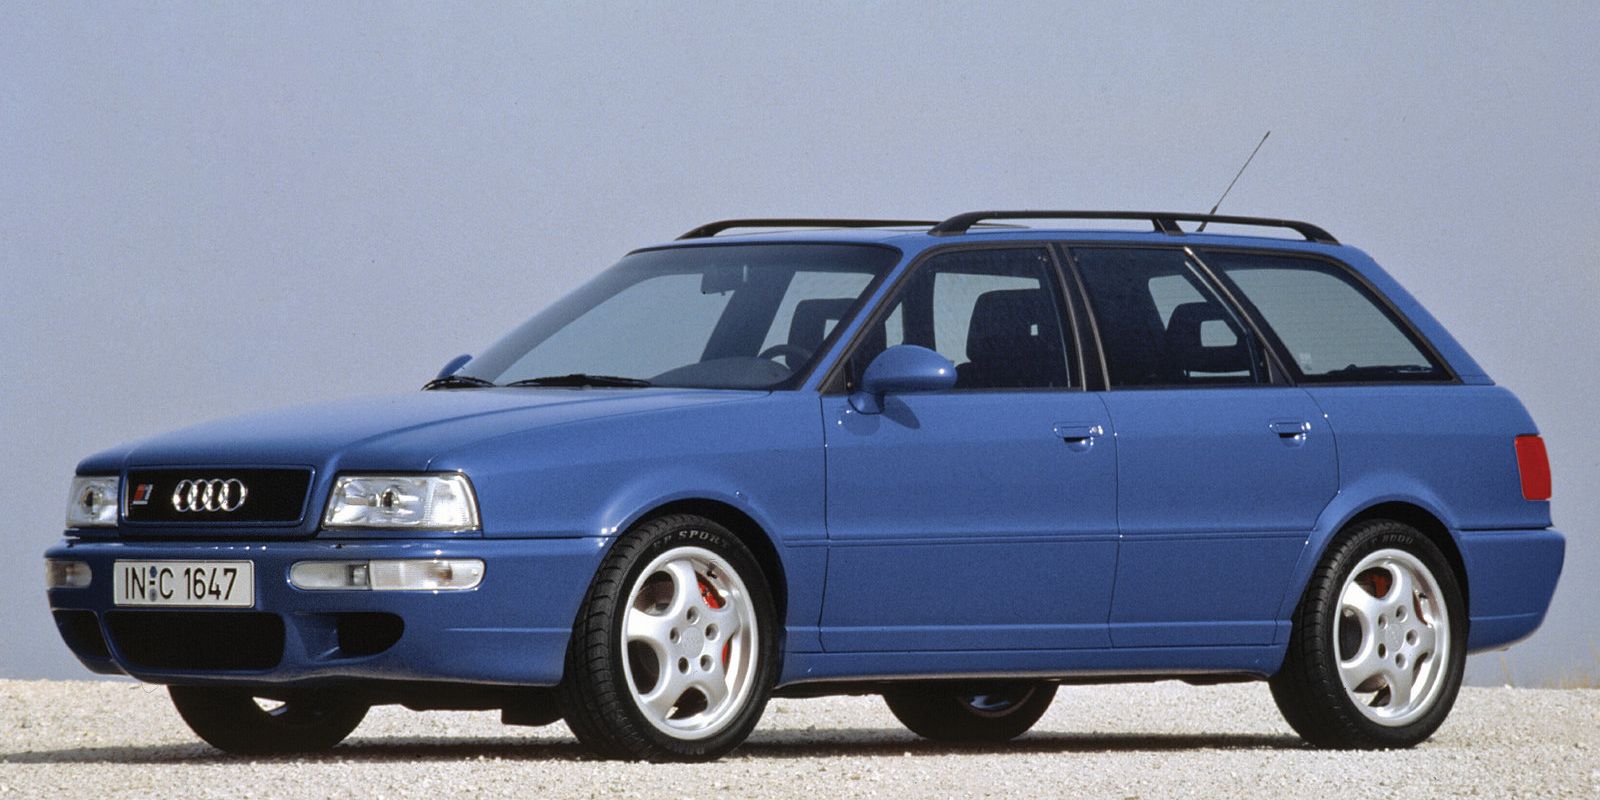 The Audi Rs2 Avant Is Still Impressive 22 Years Later